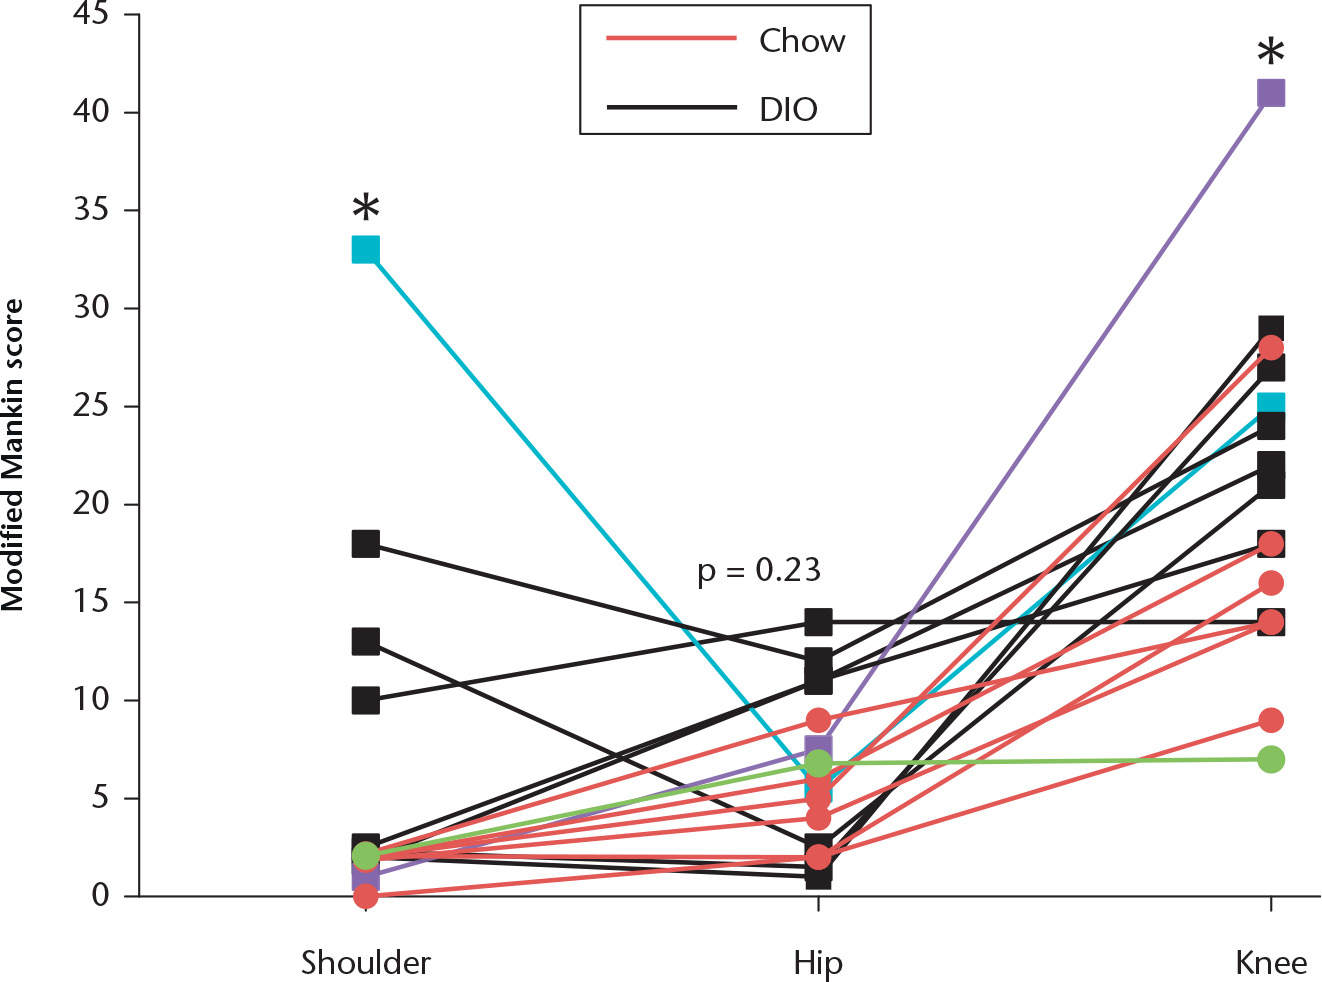 Fig. 1 
            Graph showing that diet-induced obesity (DIO) leads to increases in the severity of joint damage in the shoulders, knees, and hips of rats. DIO animals (n = 9) had increased Modified Mankin scores at the shoulder and knee compared with chow-fed animals (n = 7). Overlapping scores are represented by one point on the graph. Each line indicates the scores for one animal across the three joints. Hip scores were similar between groups. The blue line corresponds with the DIO animal depicted in Figure 2 for shoulder and hip, the purple line corresponds with the DIO animal depicted in Figure 2 for knee, and the green line corresponds with the chow animal illustrated in Figure 2. *p ⩽ 0.05 between DIO versus chow for shoulder and knee joints.
          